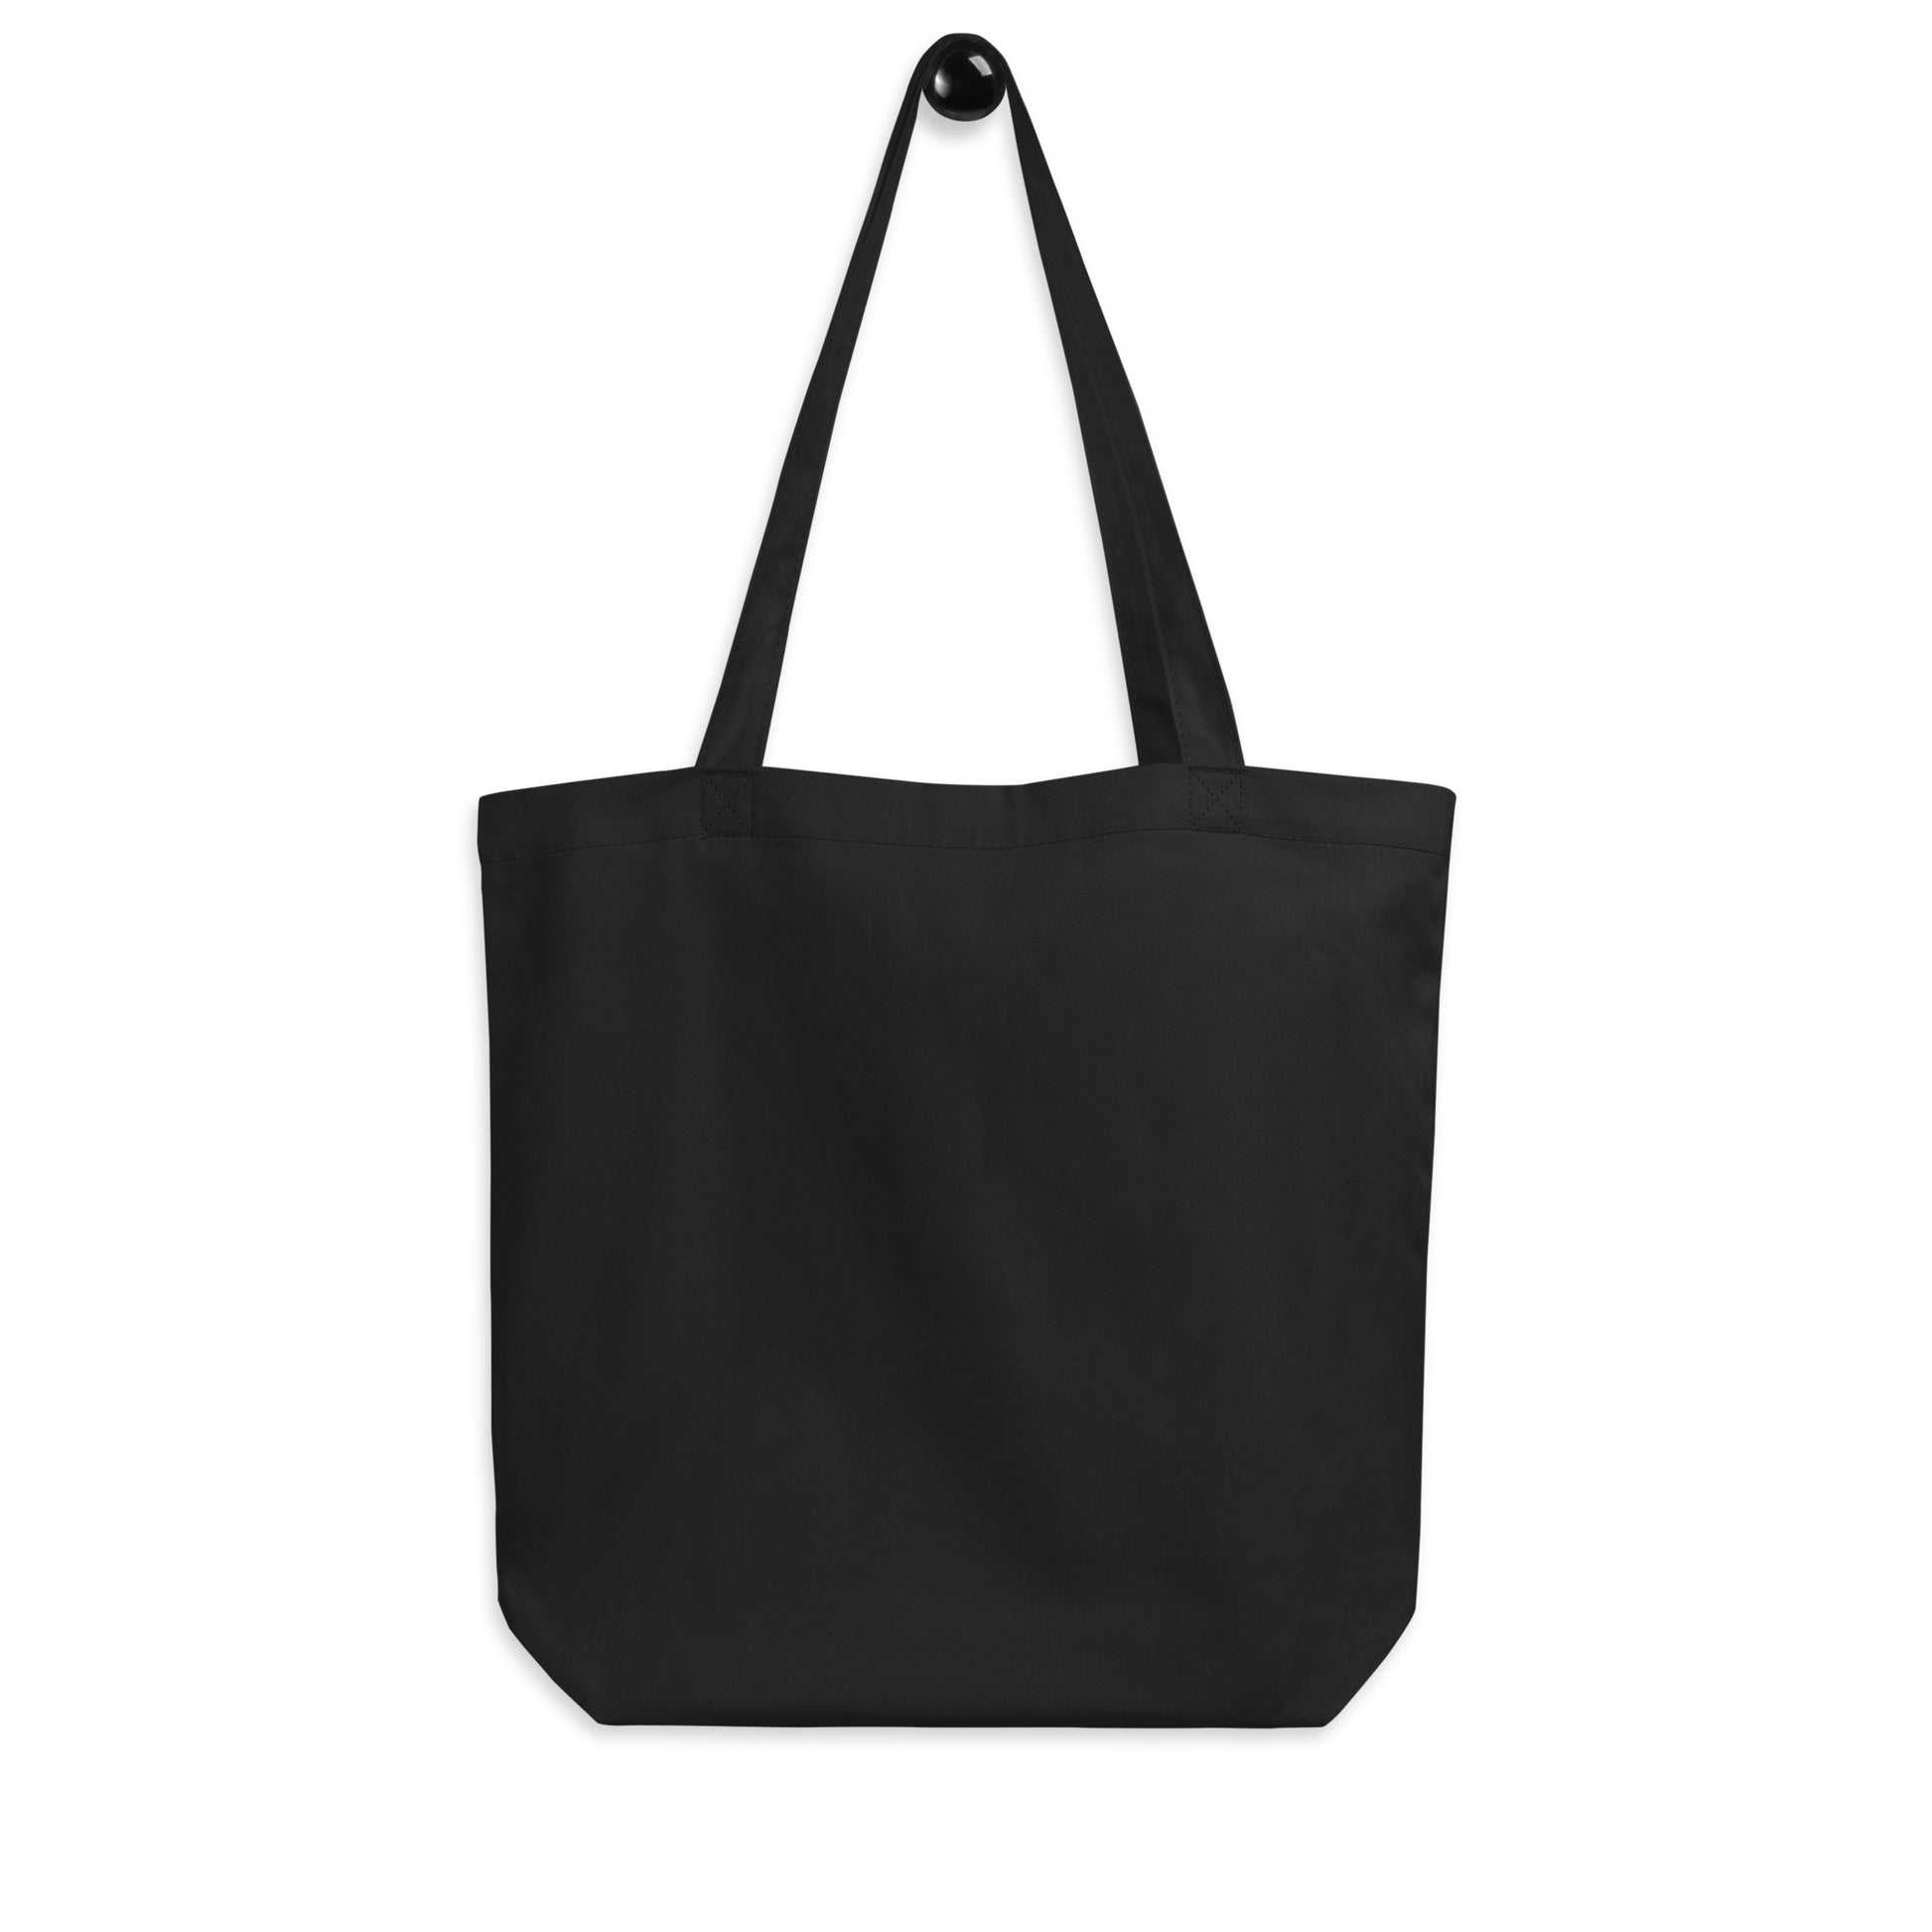 Unique Travel Gift Organic Tote - White Oval • SYR Syracuse • YHM Designs - Image 04